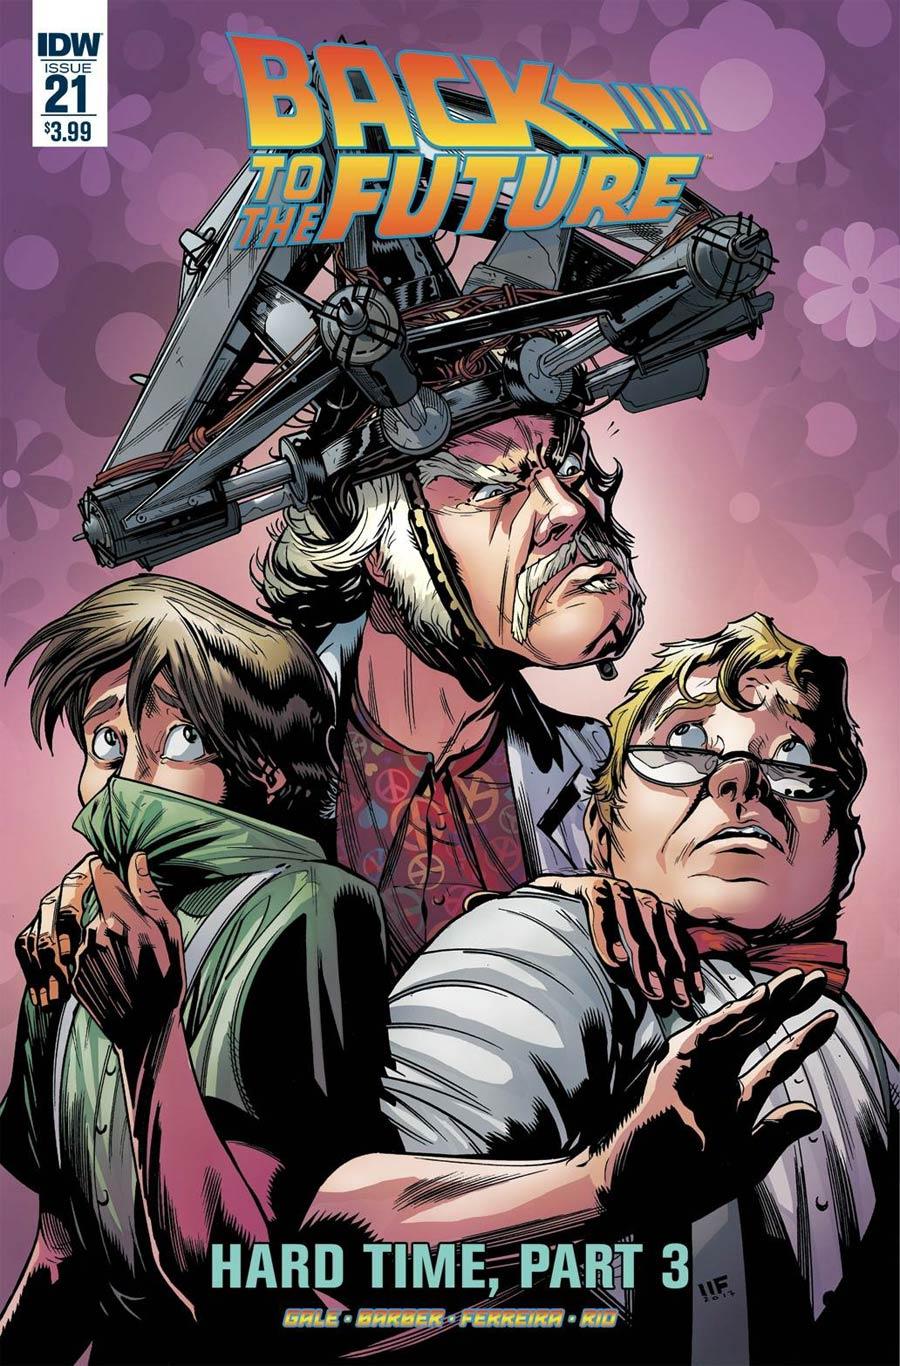 Back To The Future Vol. 2 #21